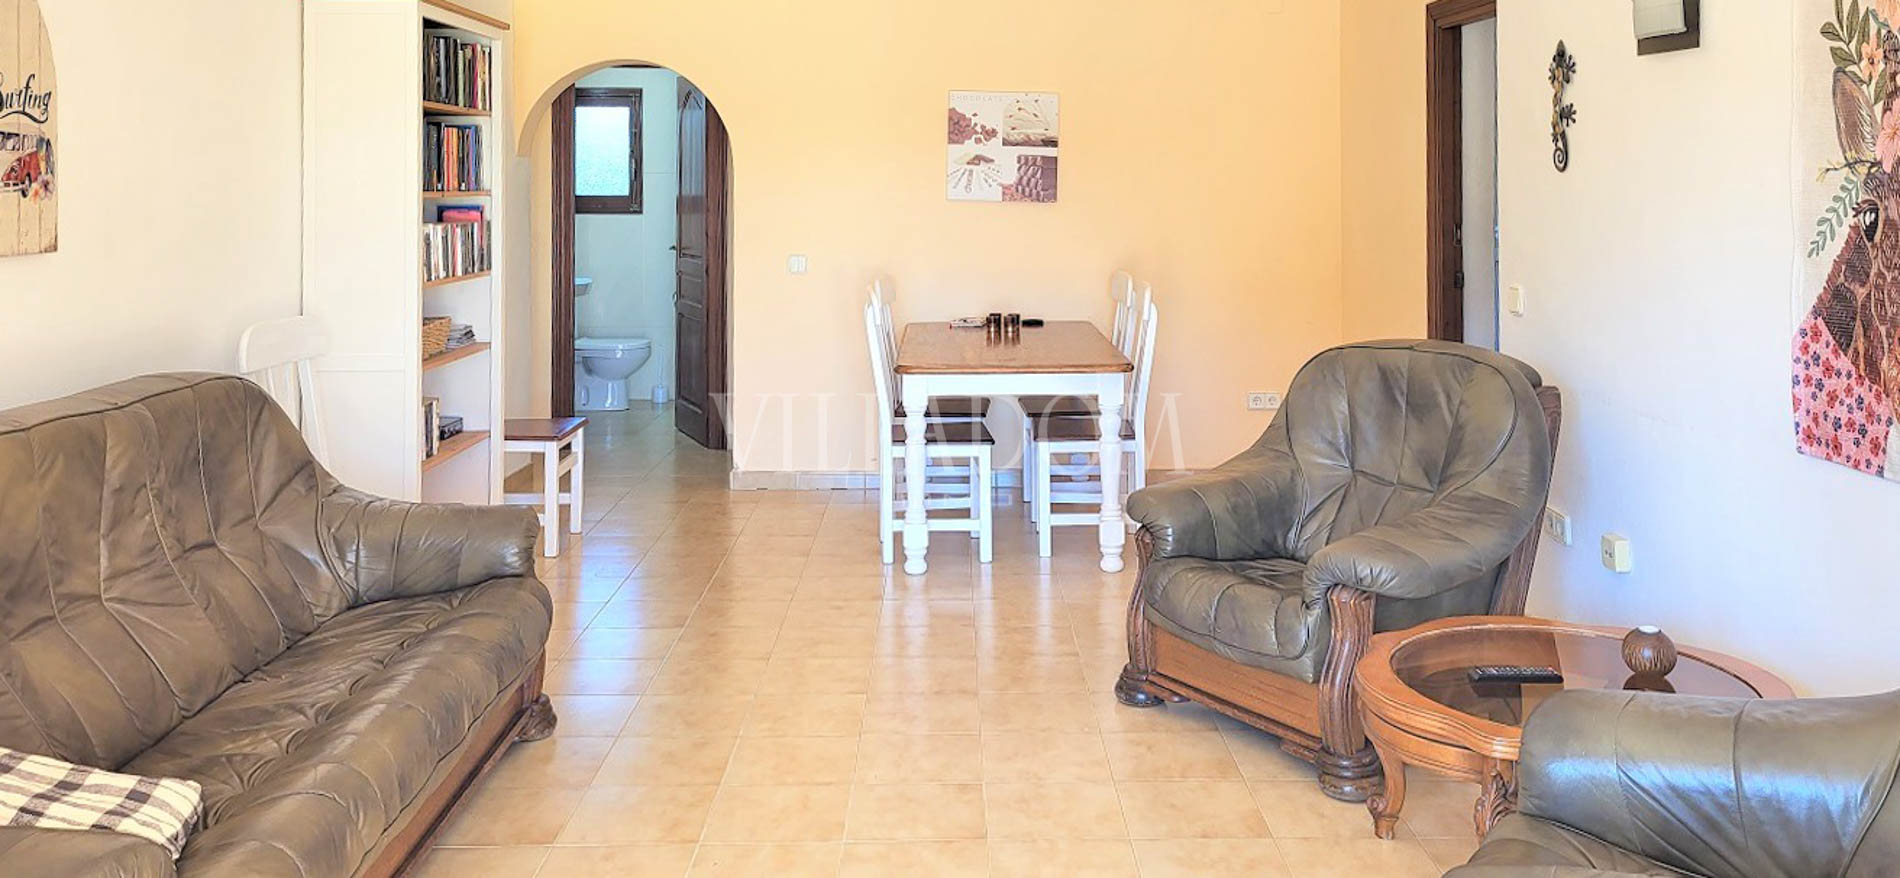 Villa with 6 bedrooms very close to the Arenal beach in Javea